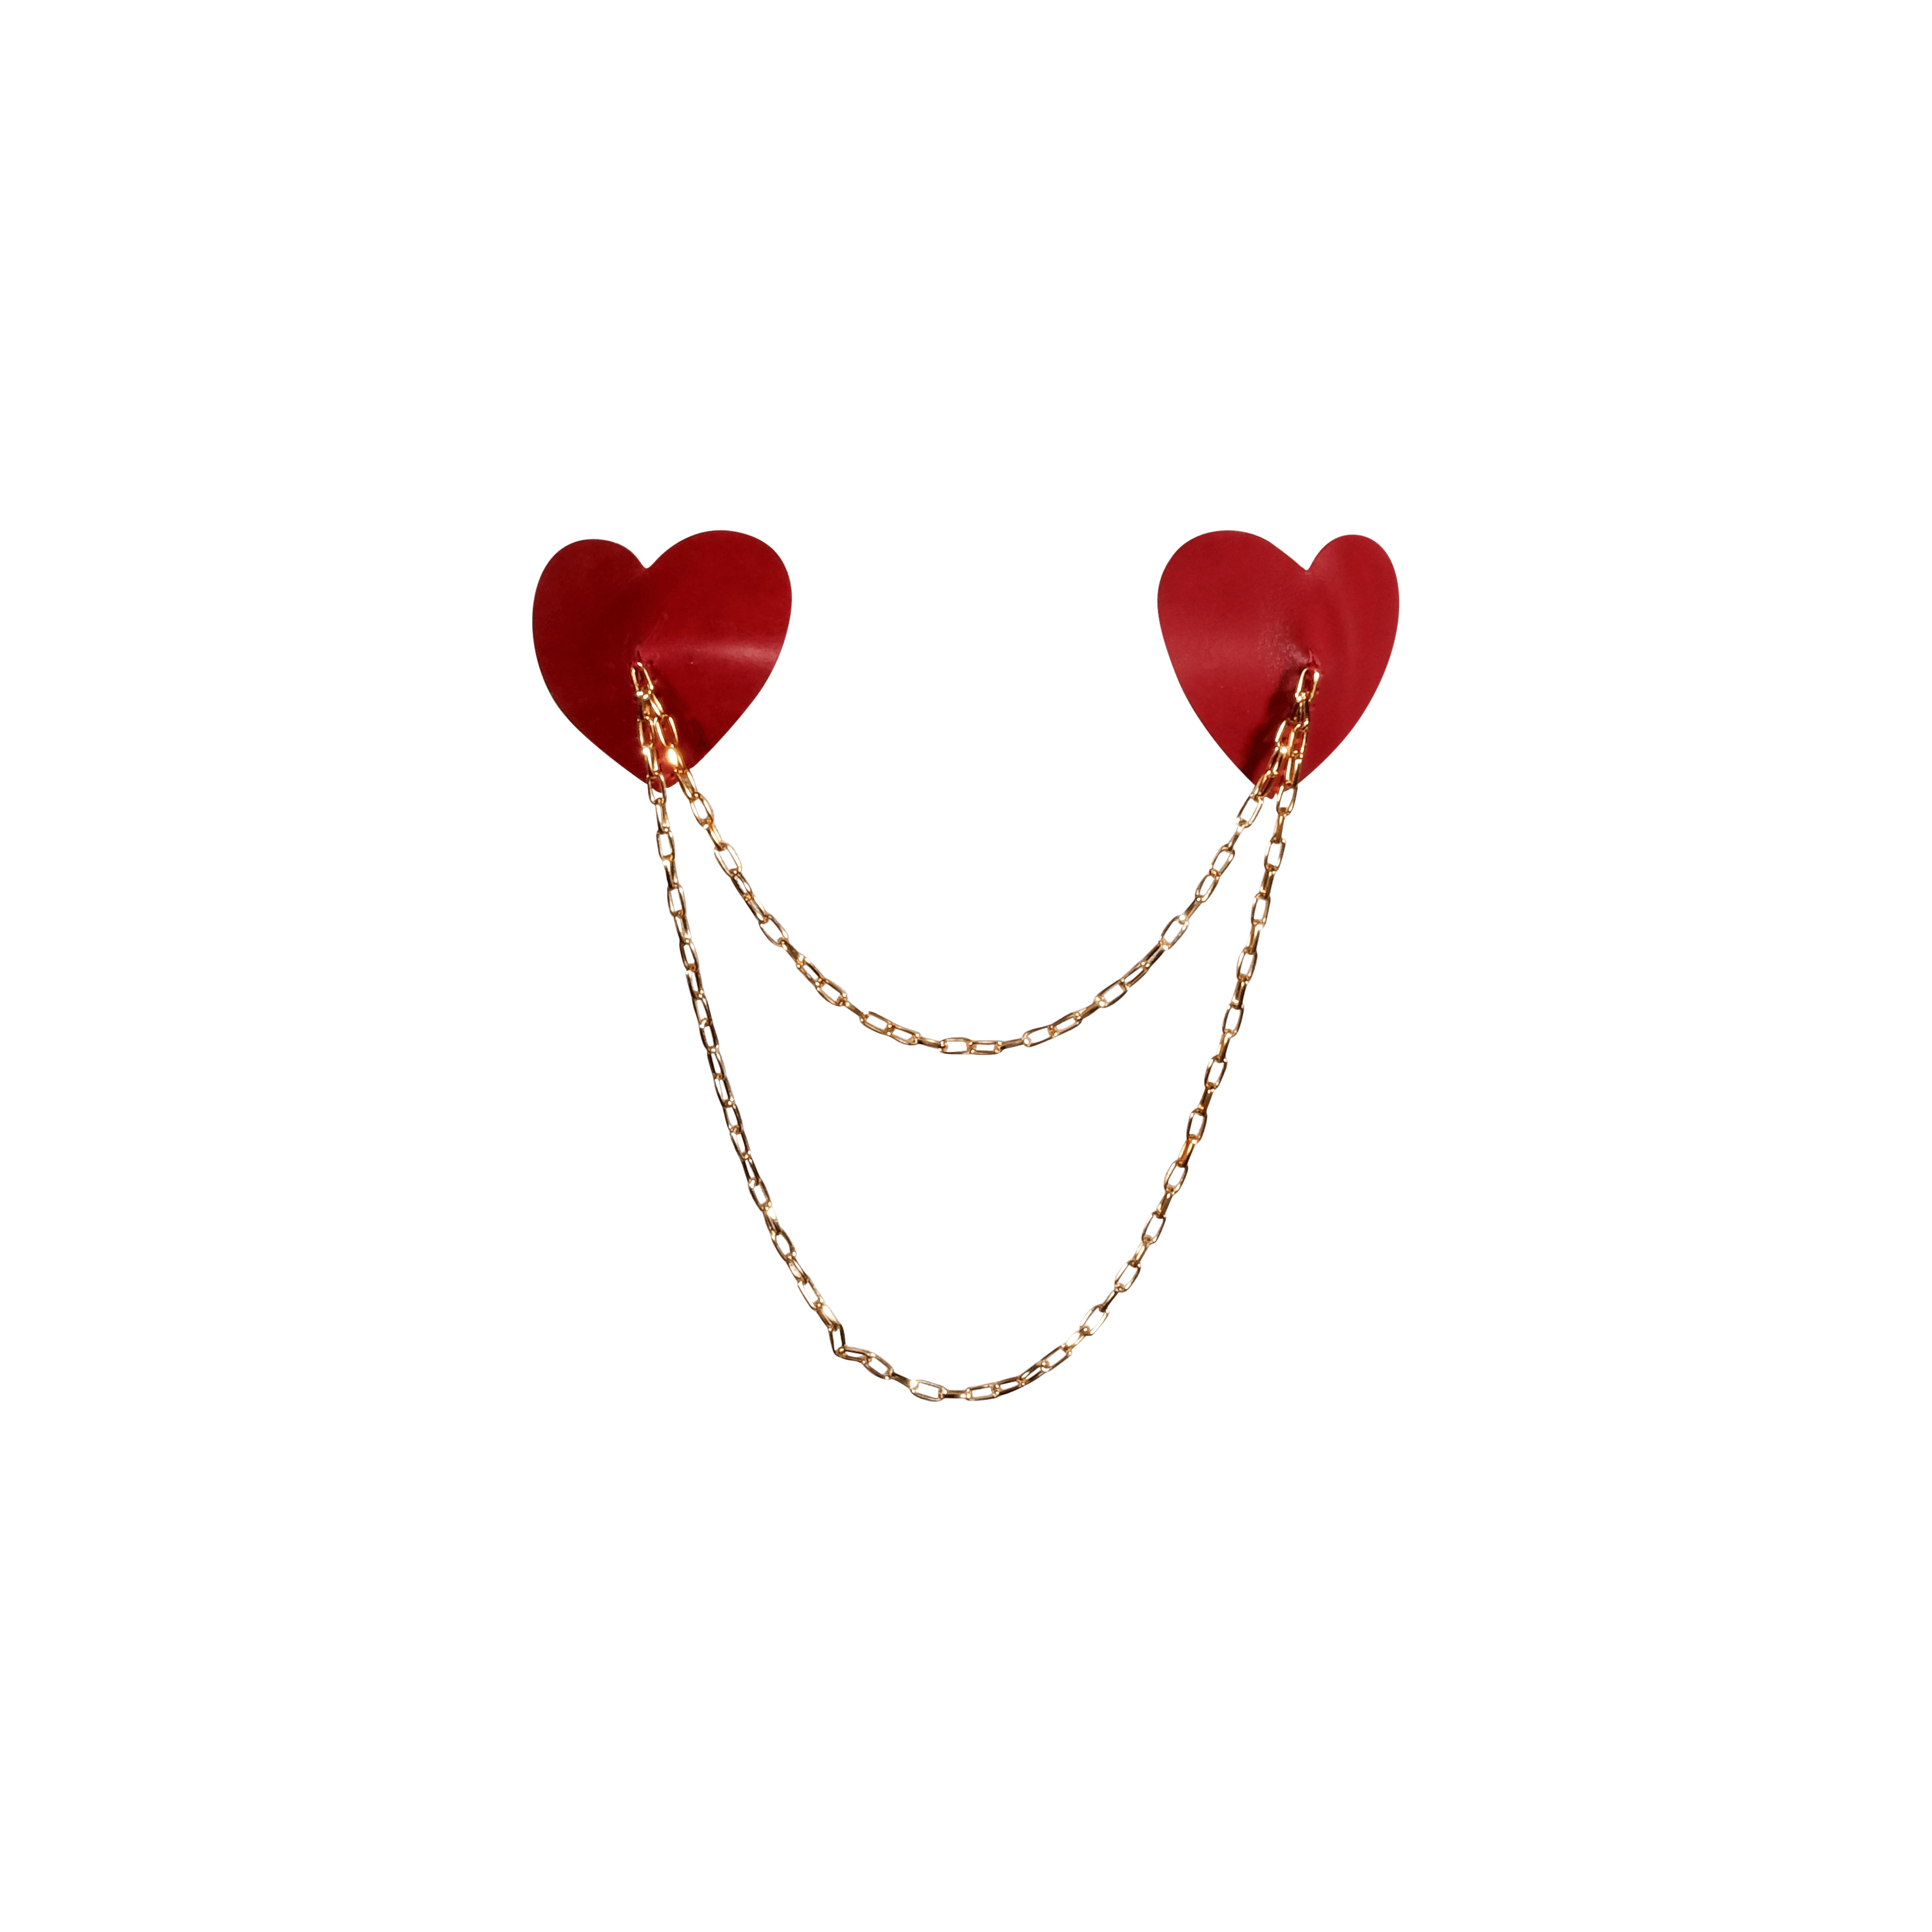 Elif Domanic Heart Shaped Pasties Met Ketting Rood